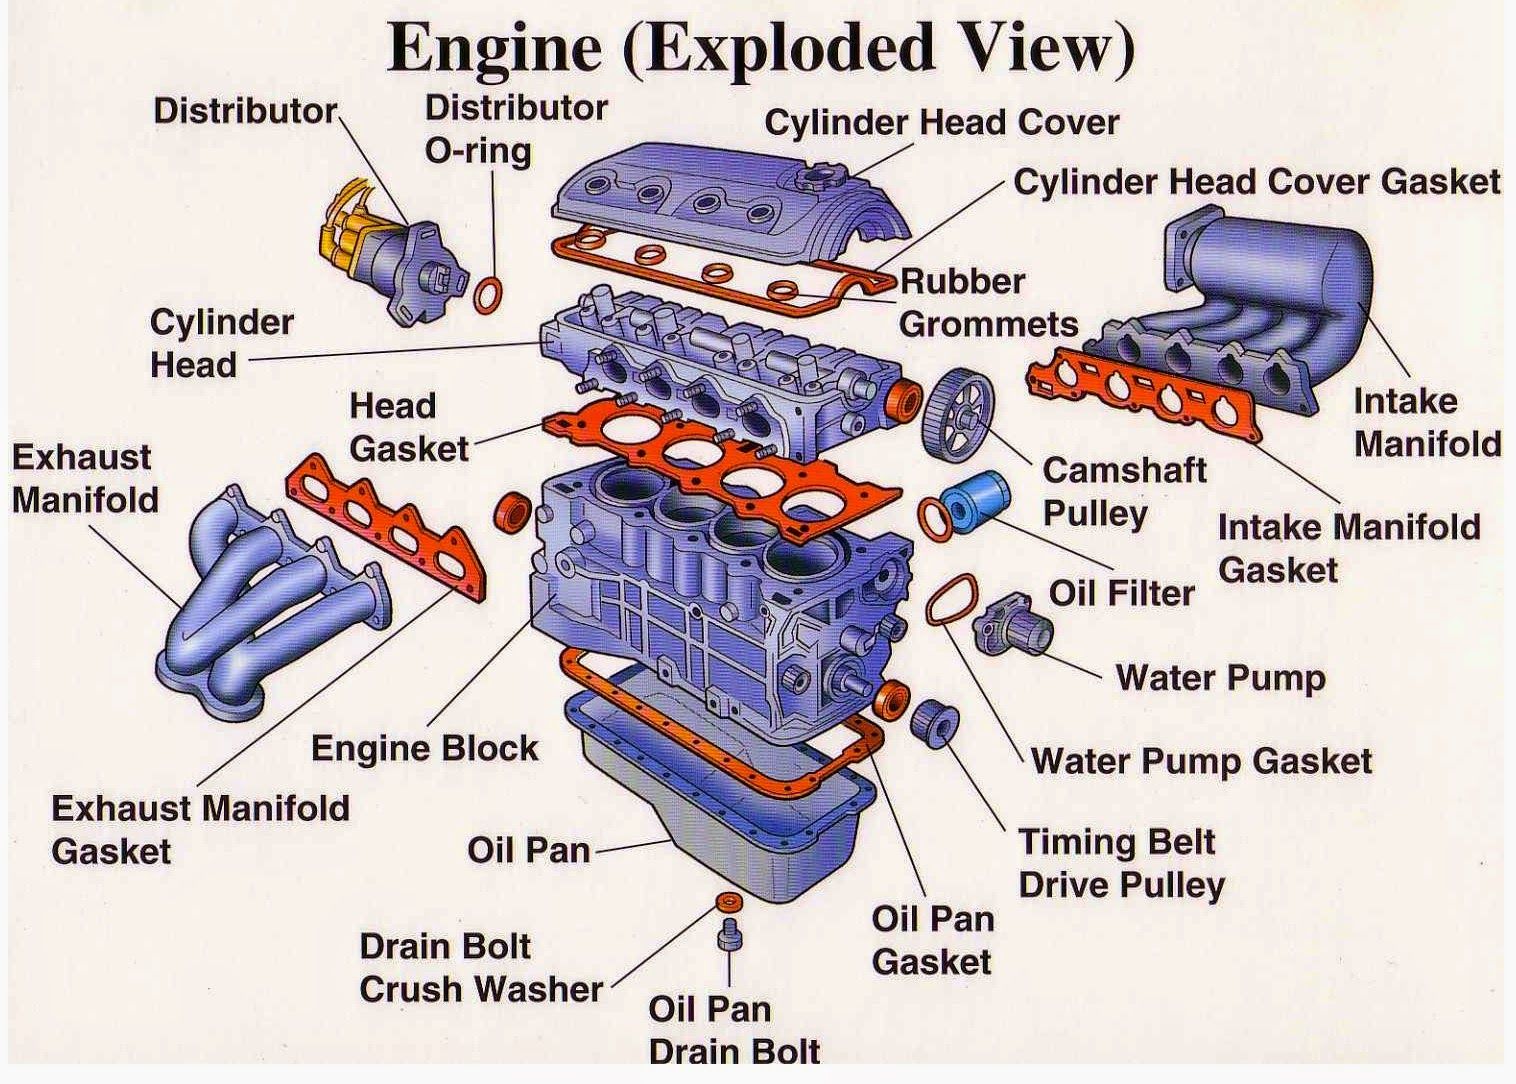 Exploded view of engine